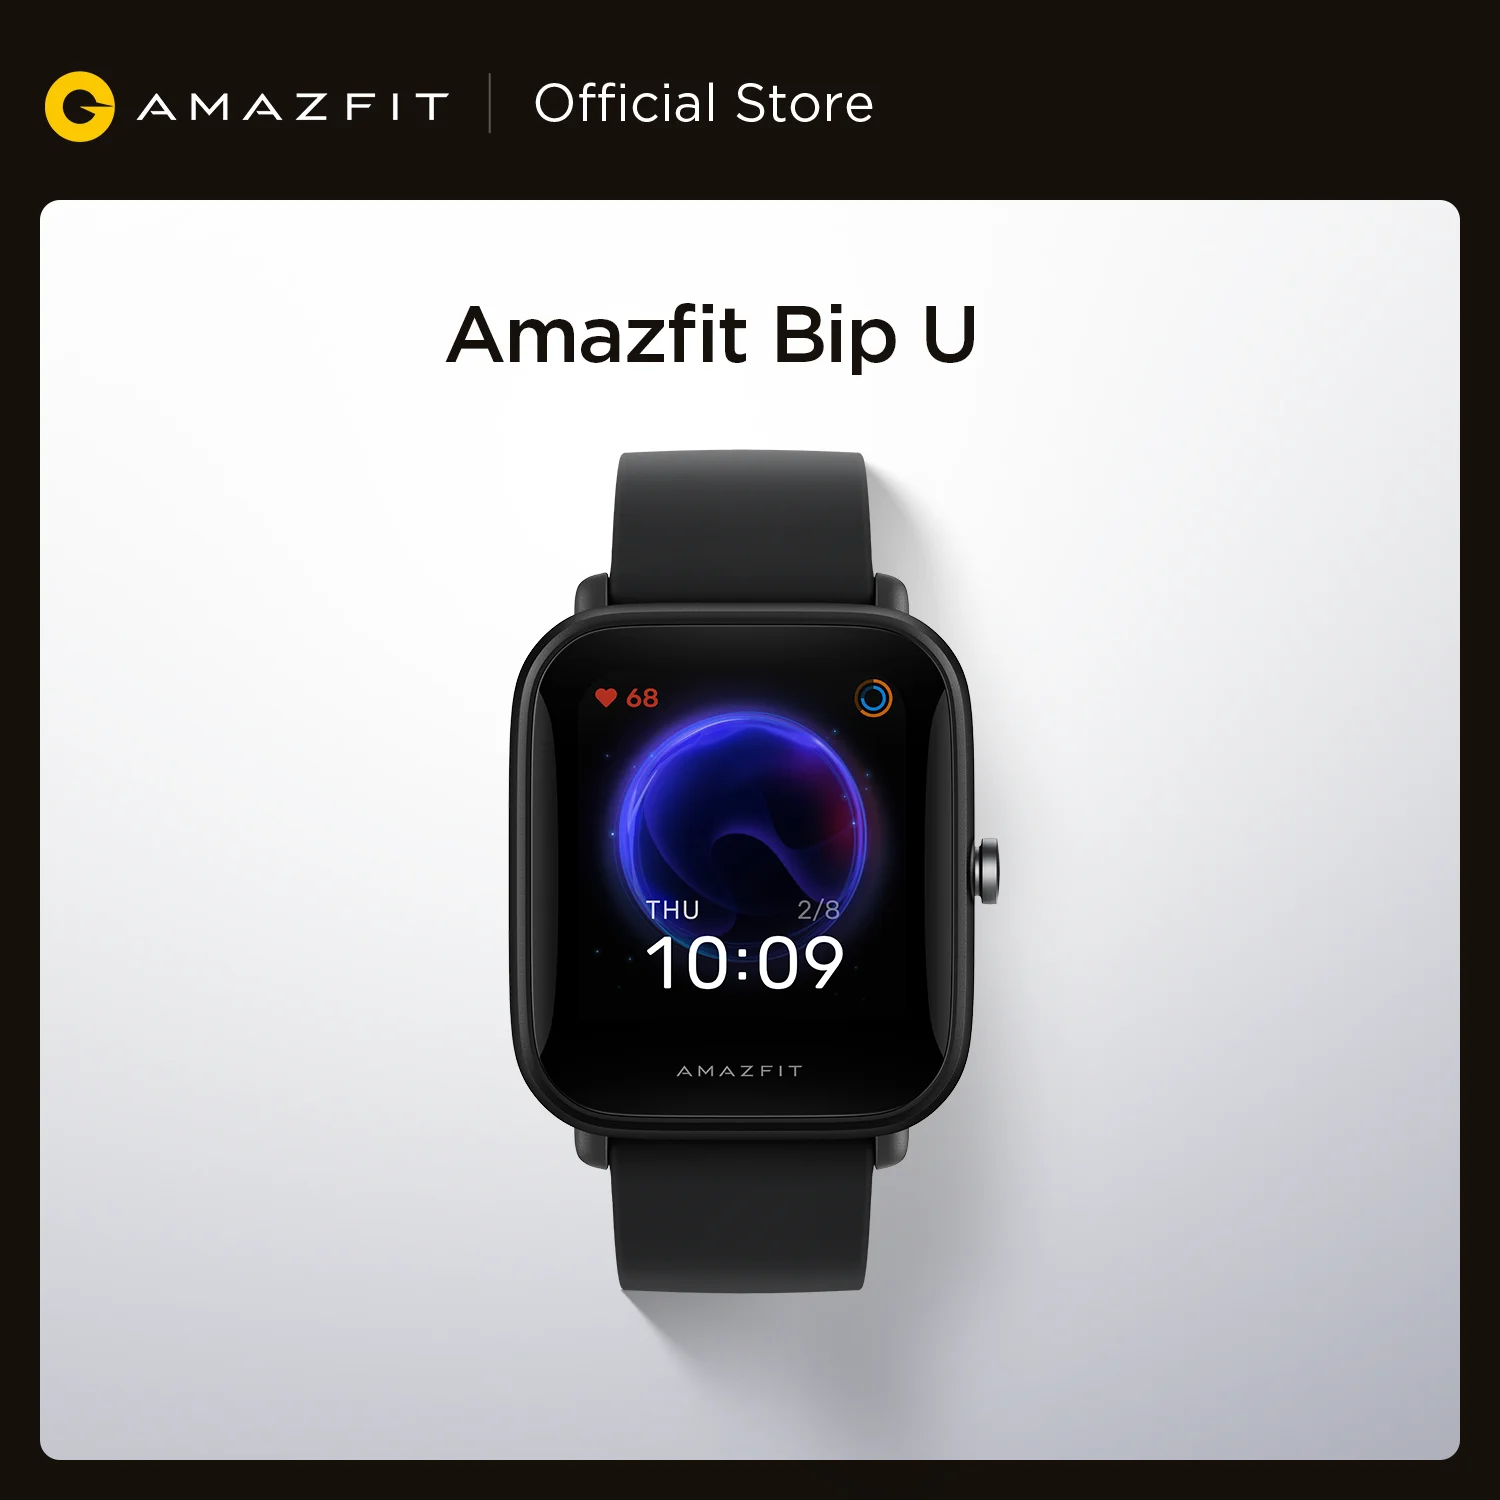 New Original Amazfit Bip U Smartwatch 5ATM Water Resistant Color Display Sport Tracking Smart Watch For Android iOS Phone